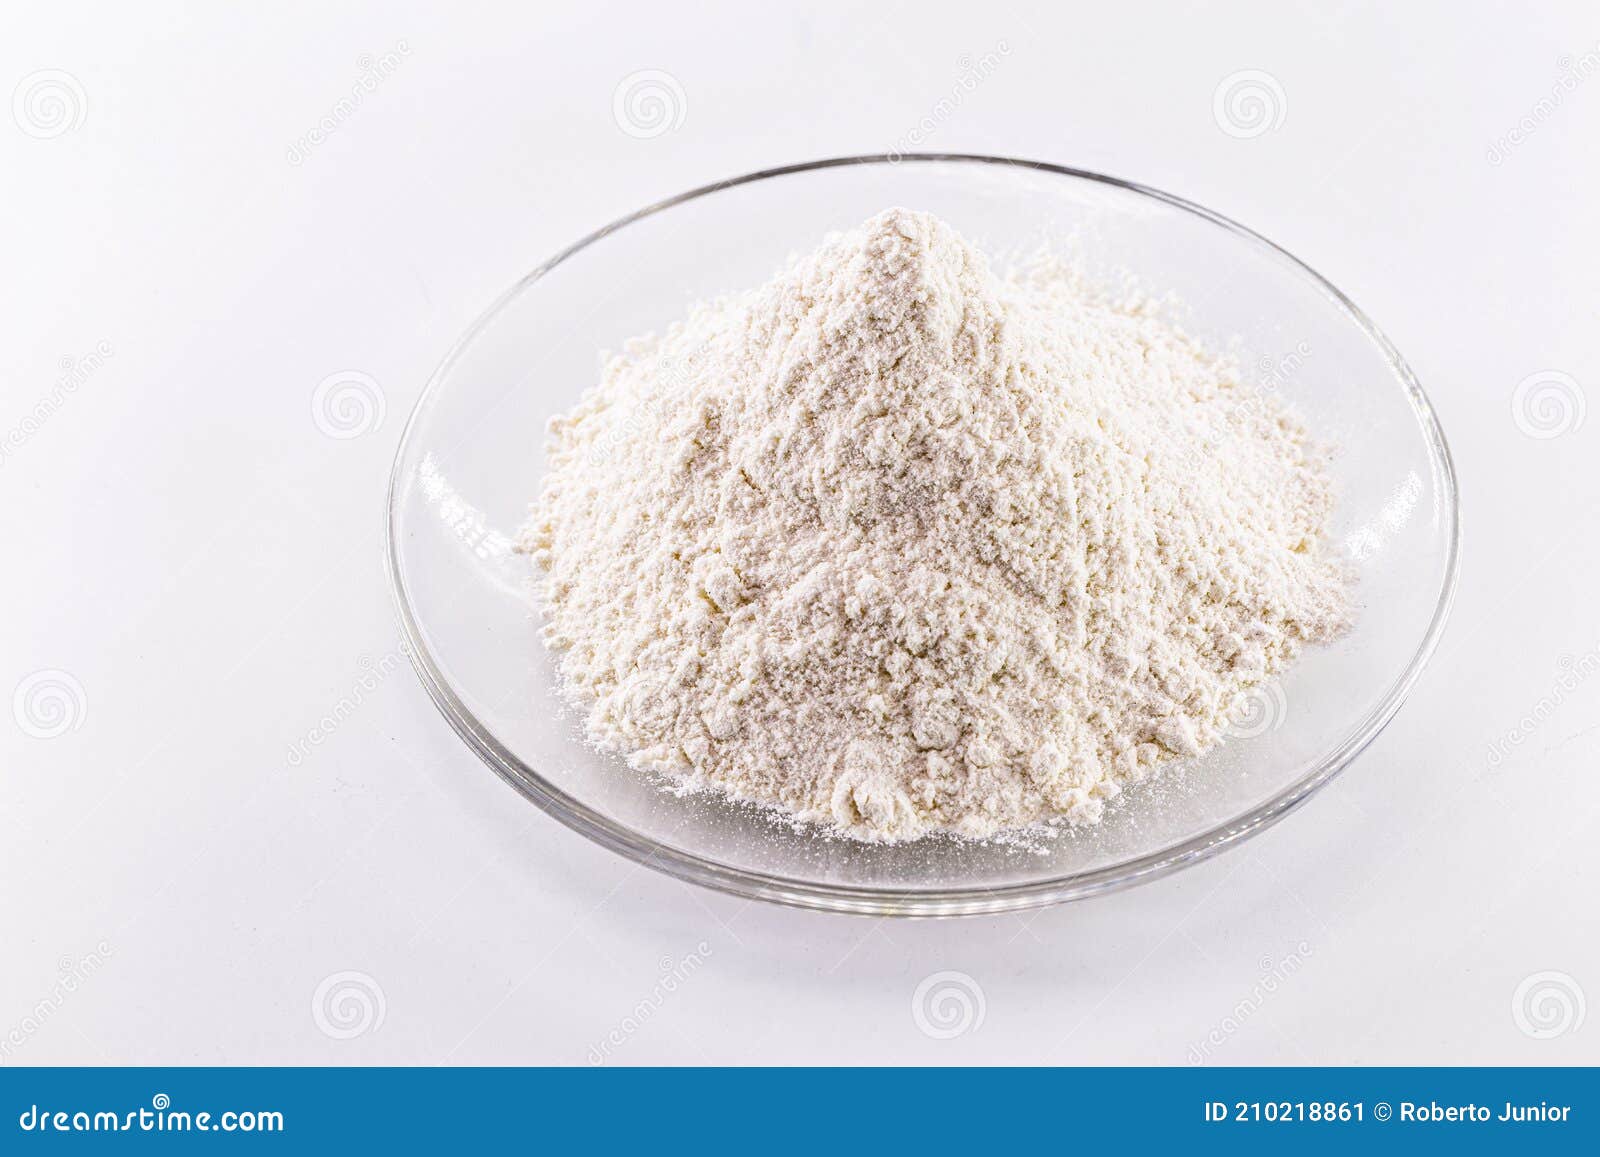 pile of solid potassium chlorate on white background